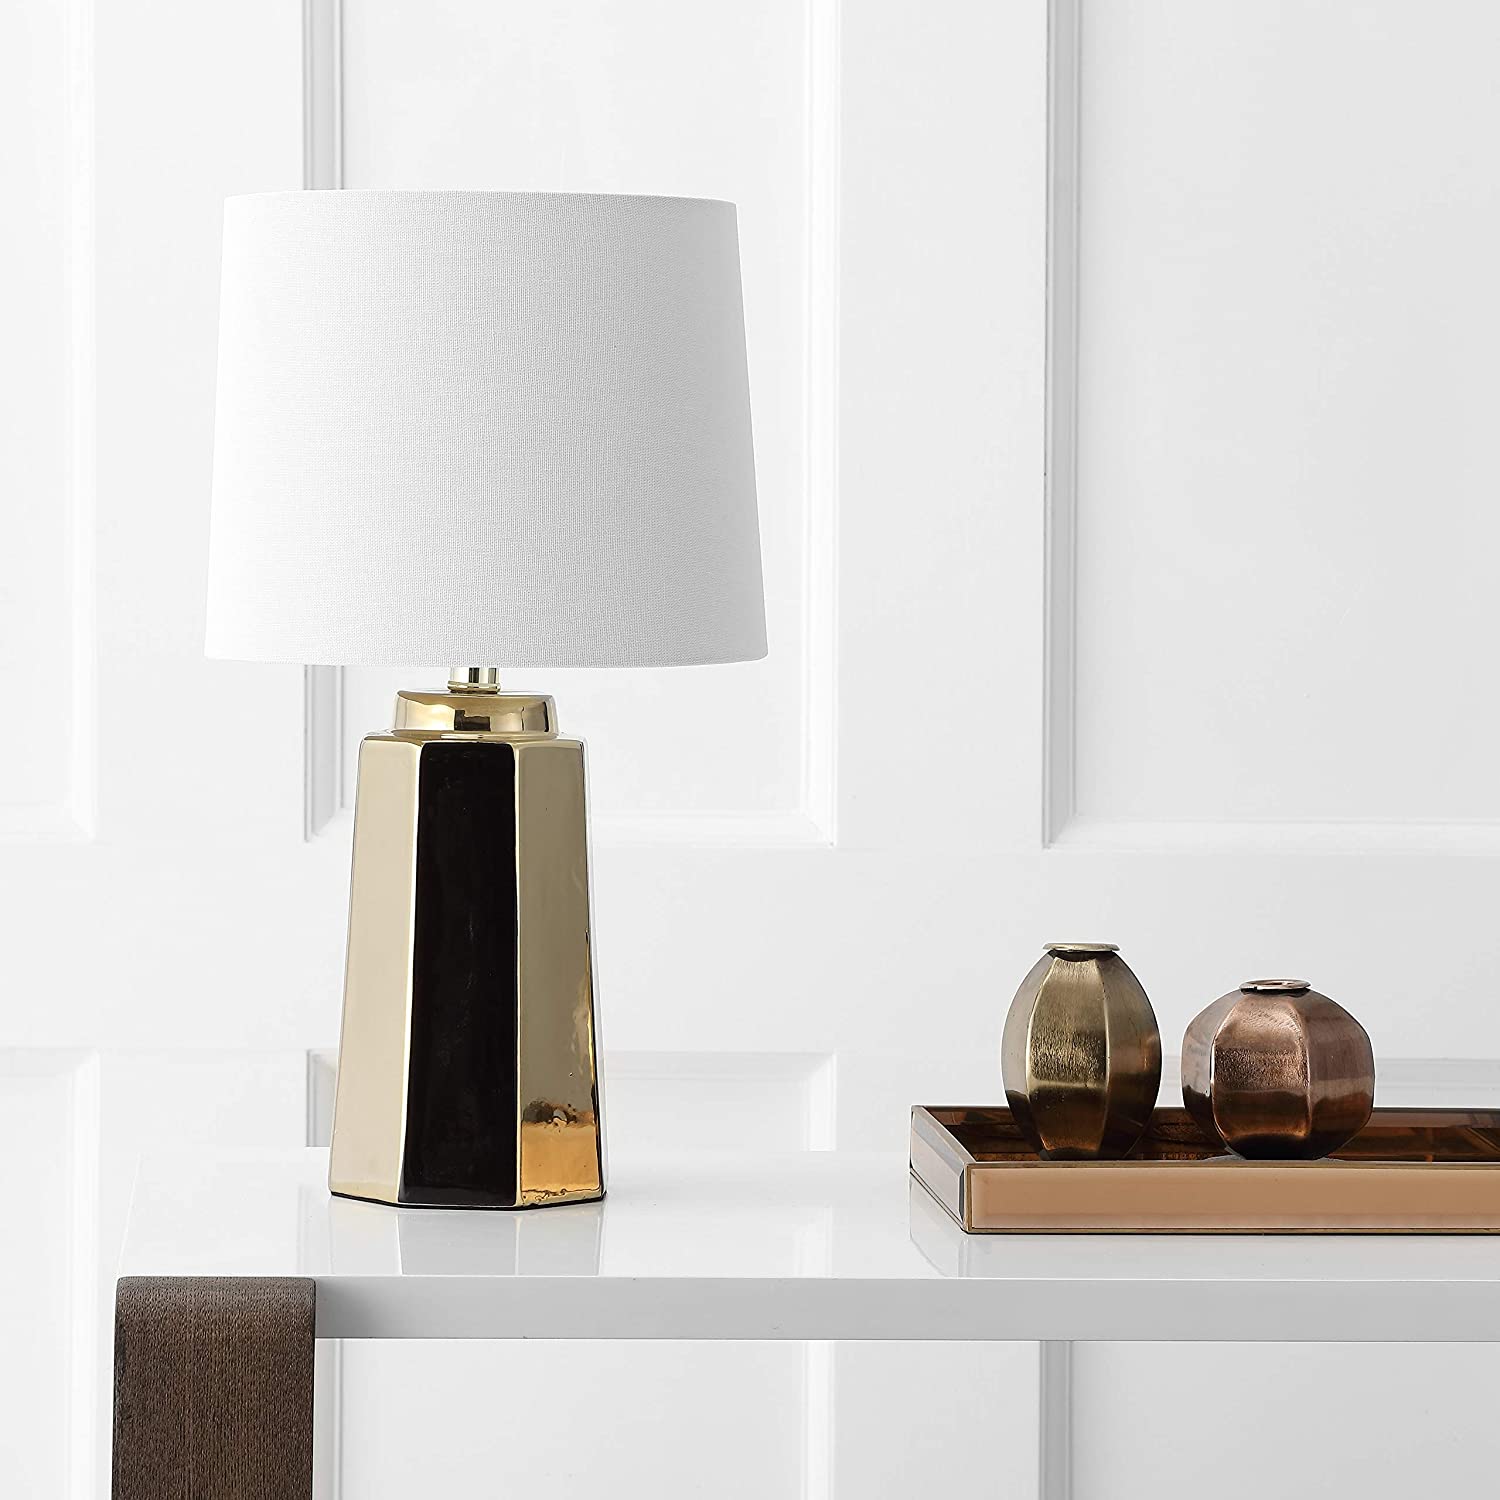 Safavieh TBL4089A Lighting Collection Parlon Plated Gold Table Lamp $41.54 (REG $113.22)